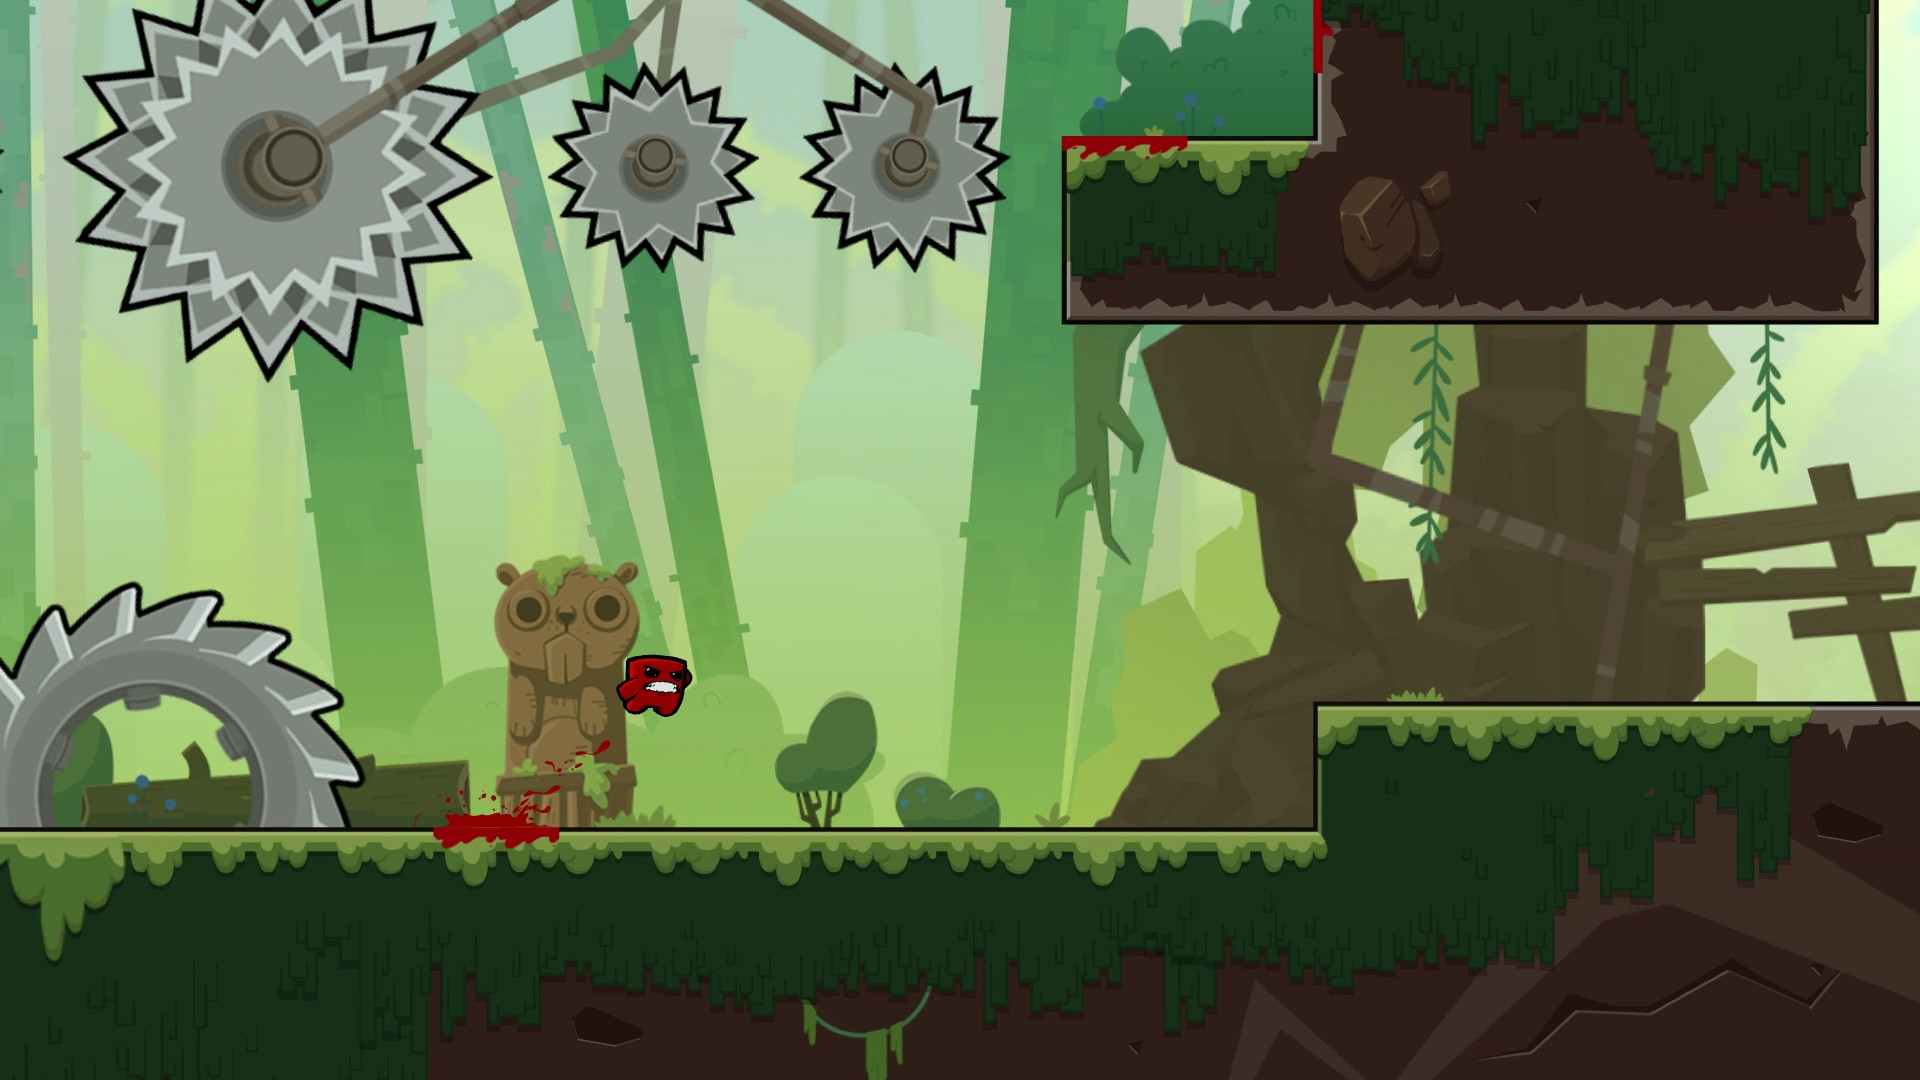 Pc games like super meat boy torrent savagery in heart of darkness and apocalypse now torrent